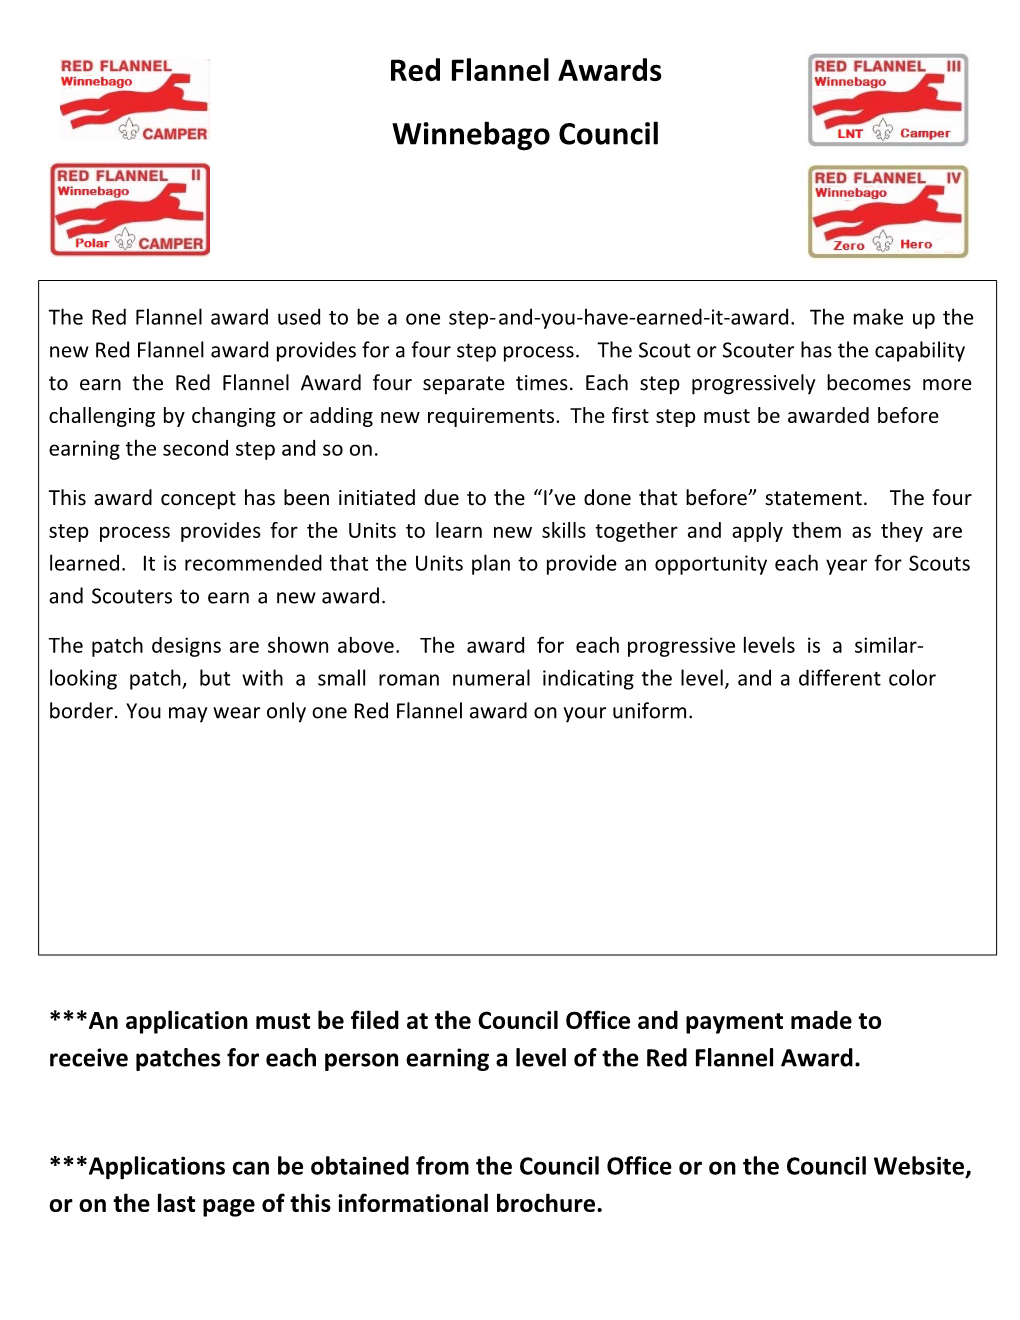 Red Flannel Awards Winnebago Council